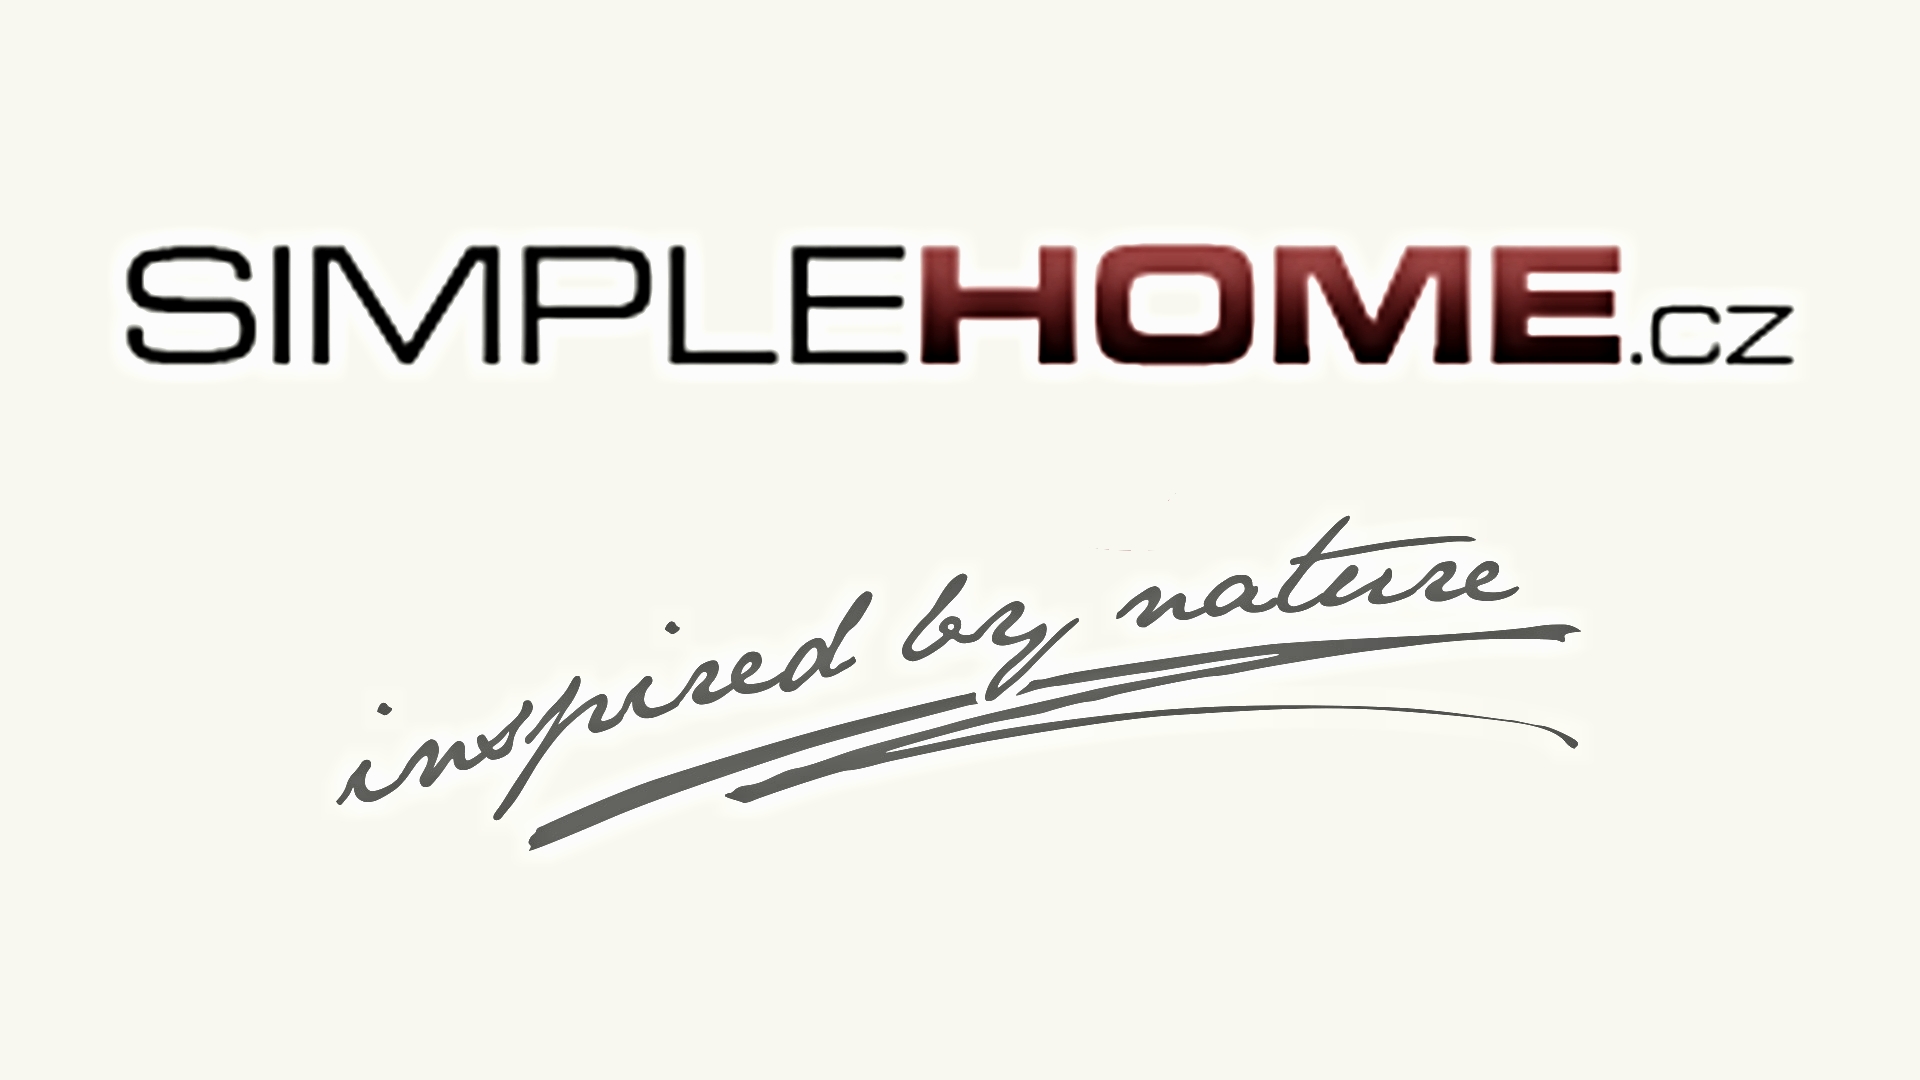 SimpleHome